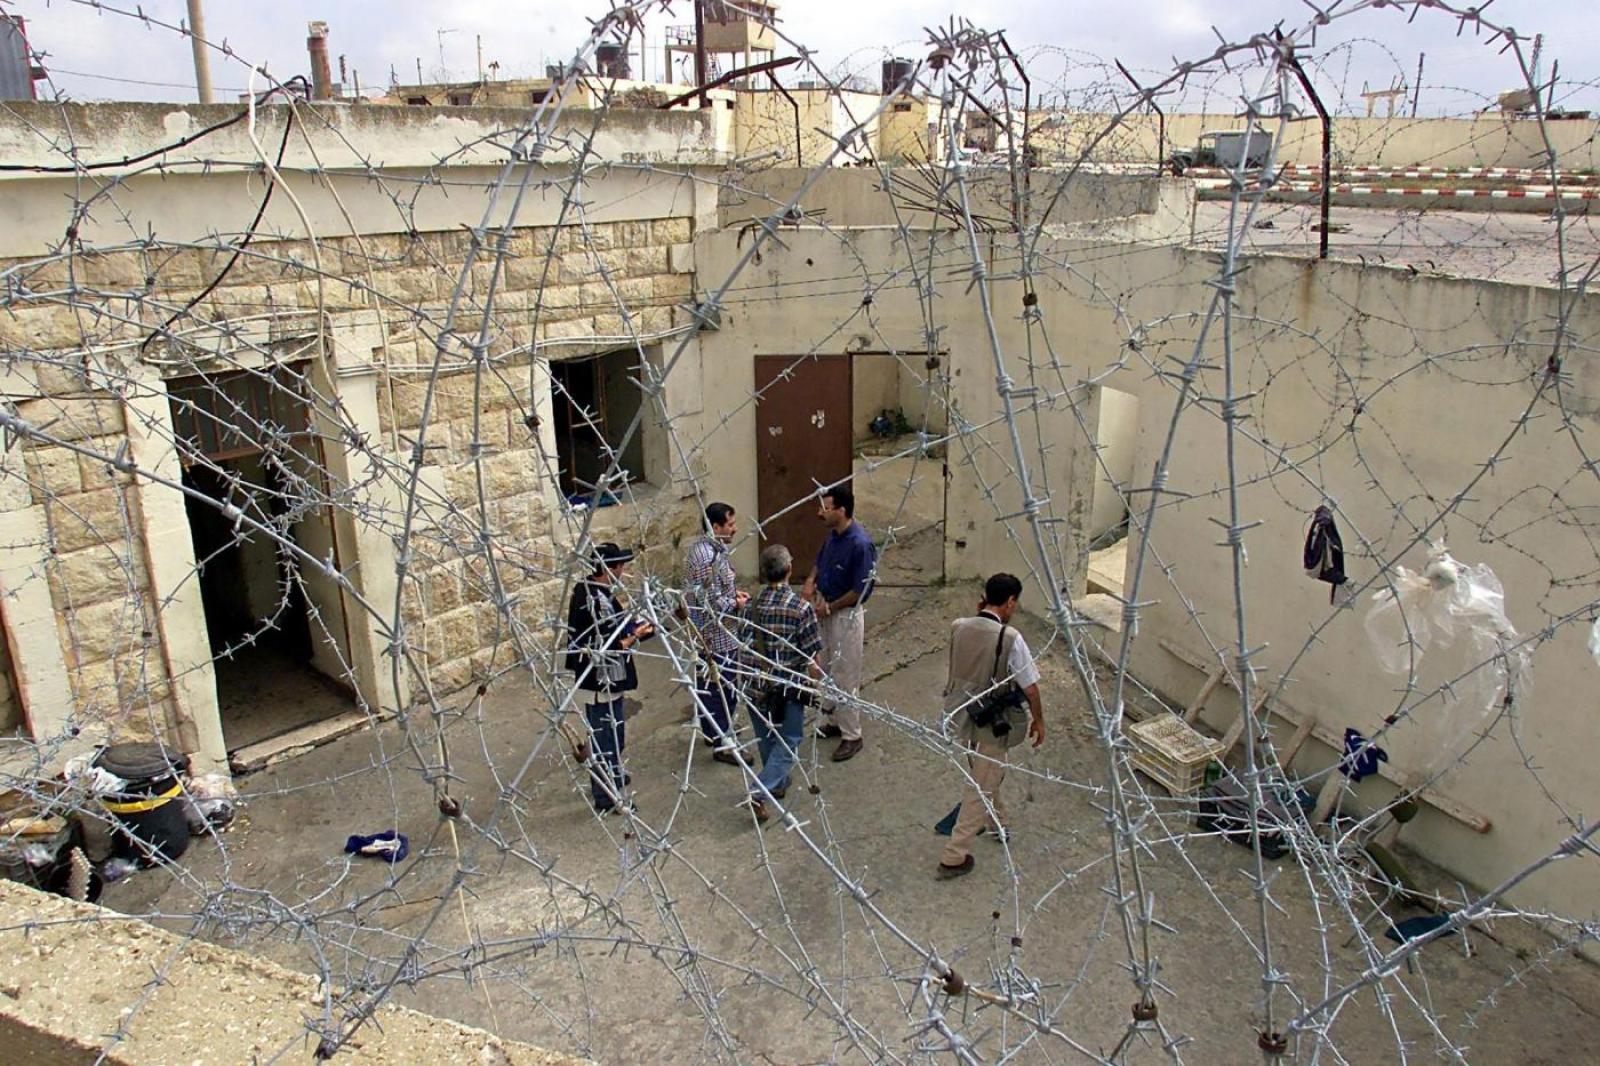 View of the courtyard of the Khiam prison on 24 May 2000, Middle East Eye, 2019.